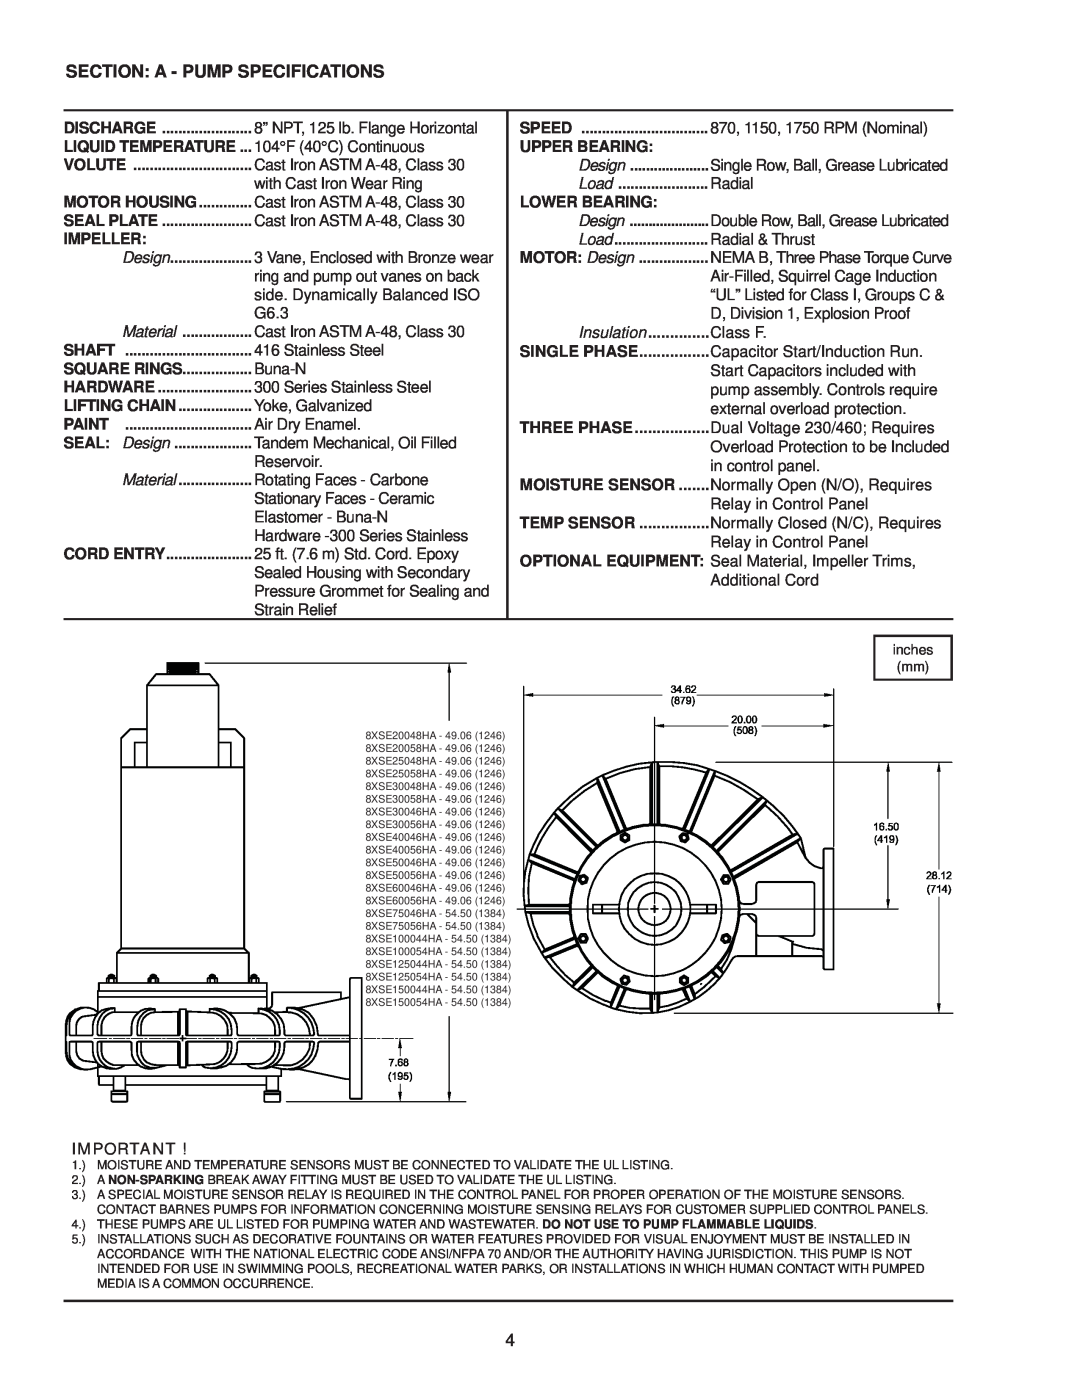 Crane Plumbing 8XSE-HA operation manual Section A - Pump Specifications 